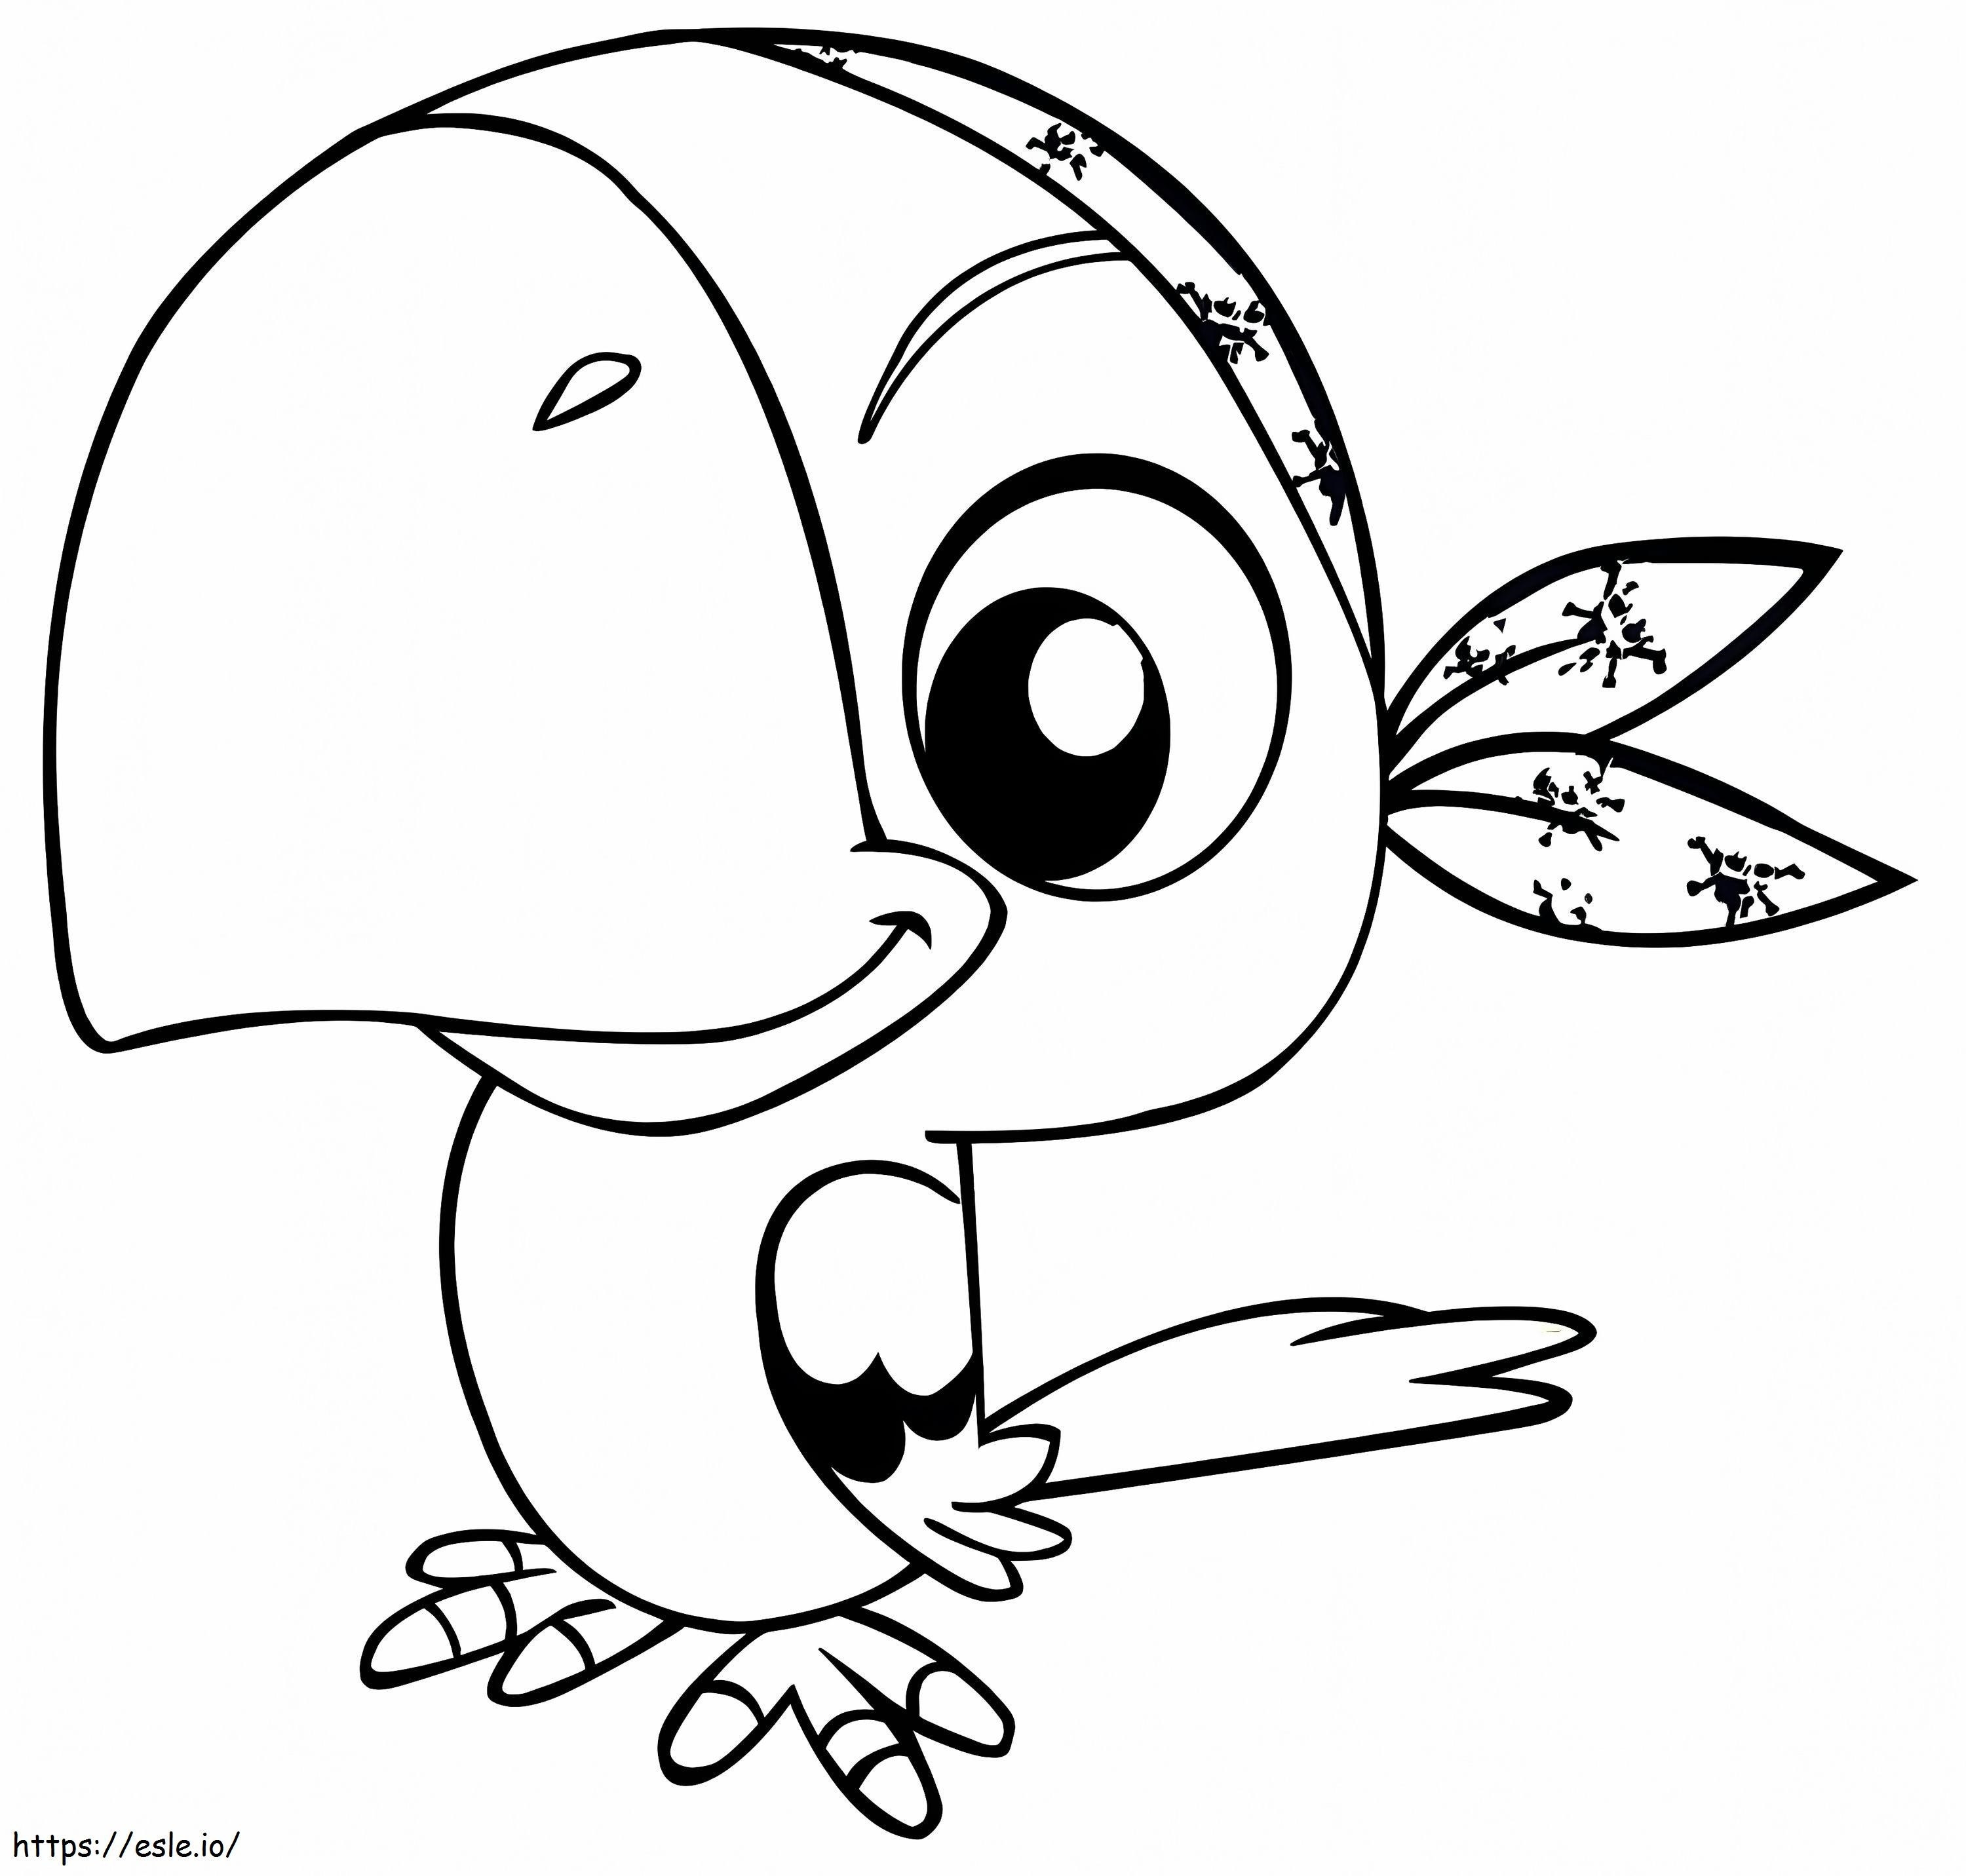 Cartoon Pirate Parrot coloring page